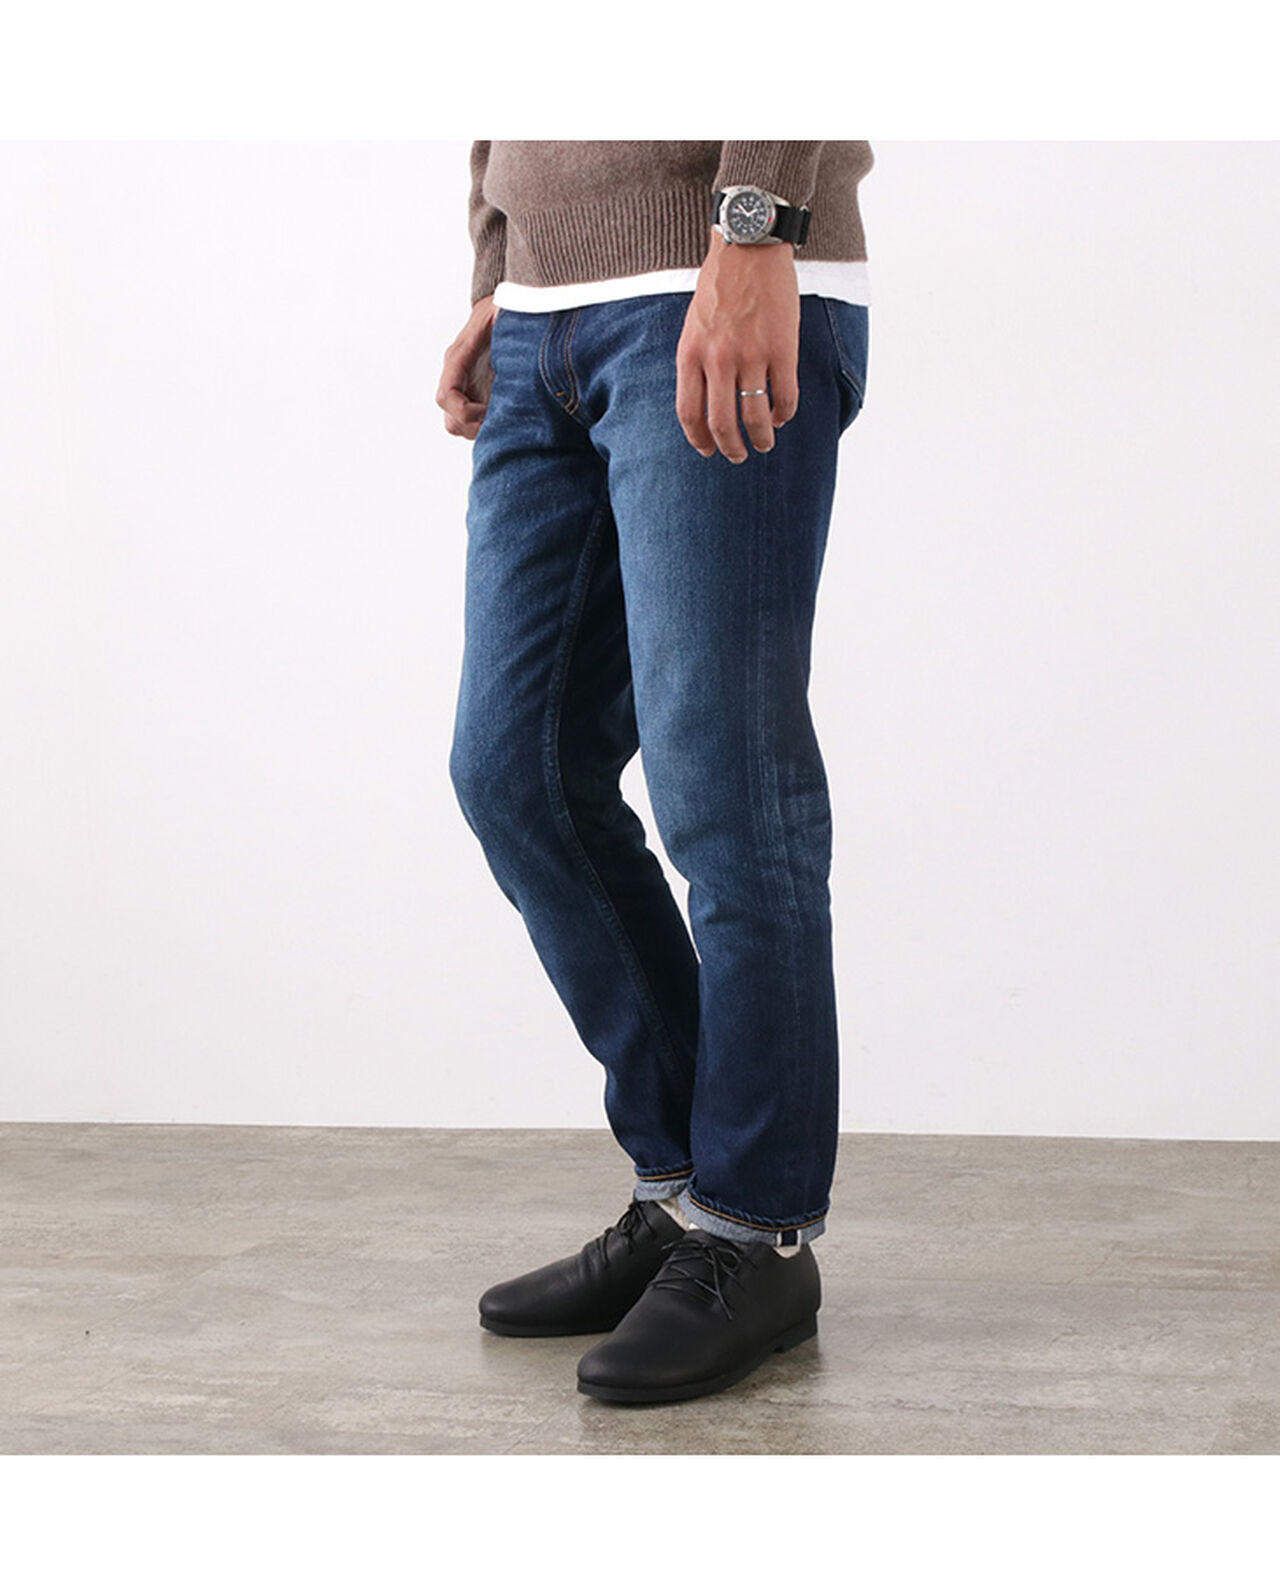 RJB6140-ME Selvic Ankle Cut Slim Tapered Jeans,, large image number 5